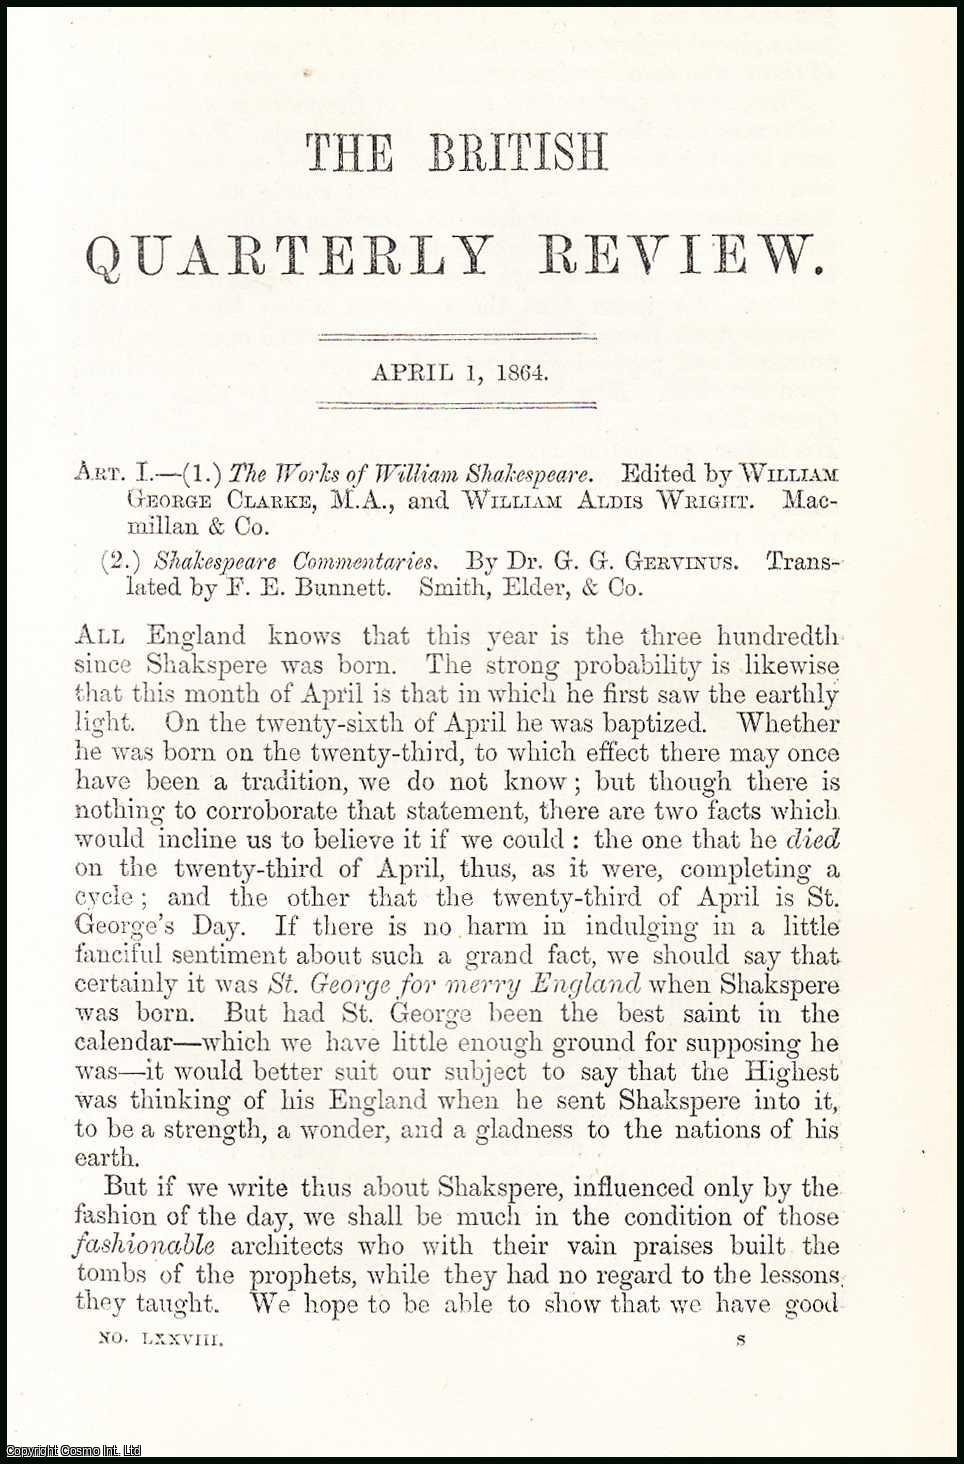 Hannah Lawrance - Shakespeare. A rare original article from the British Quarterly Review, 1864.